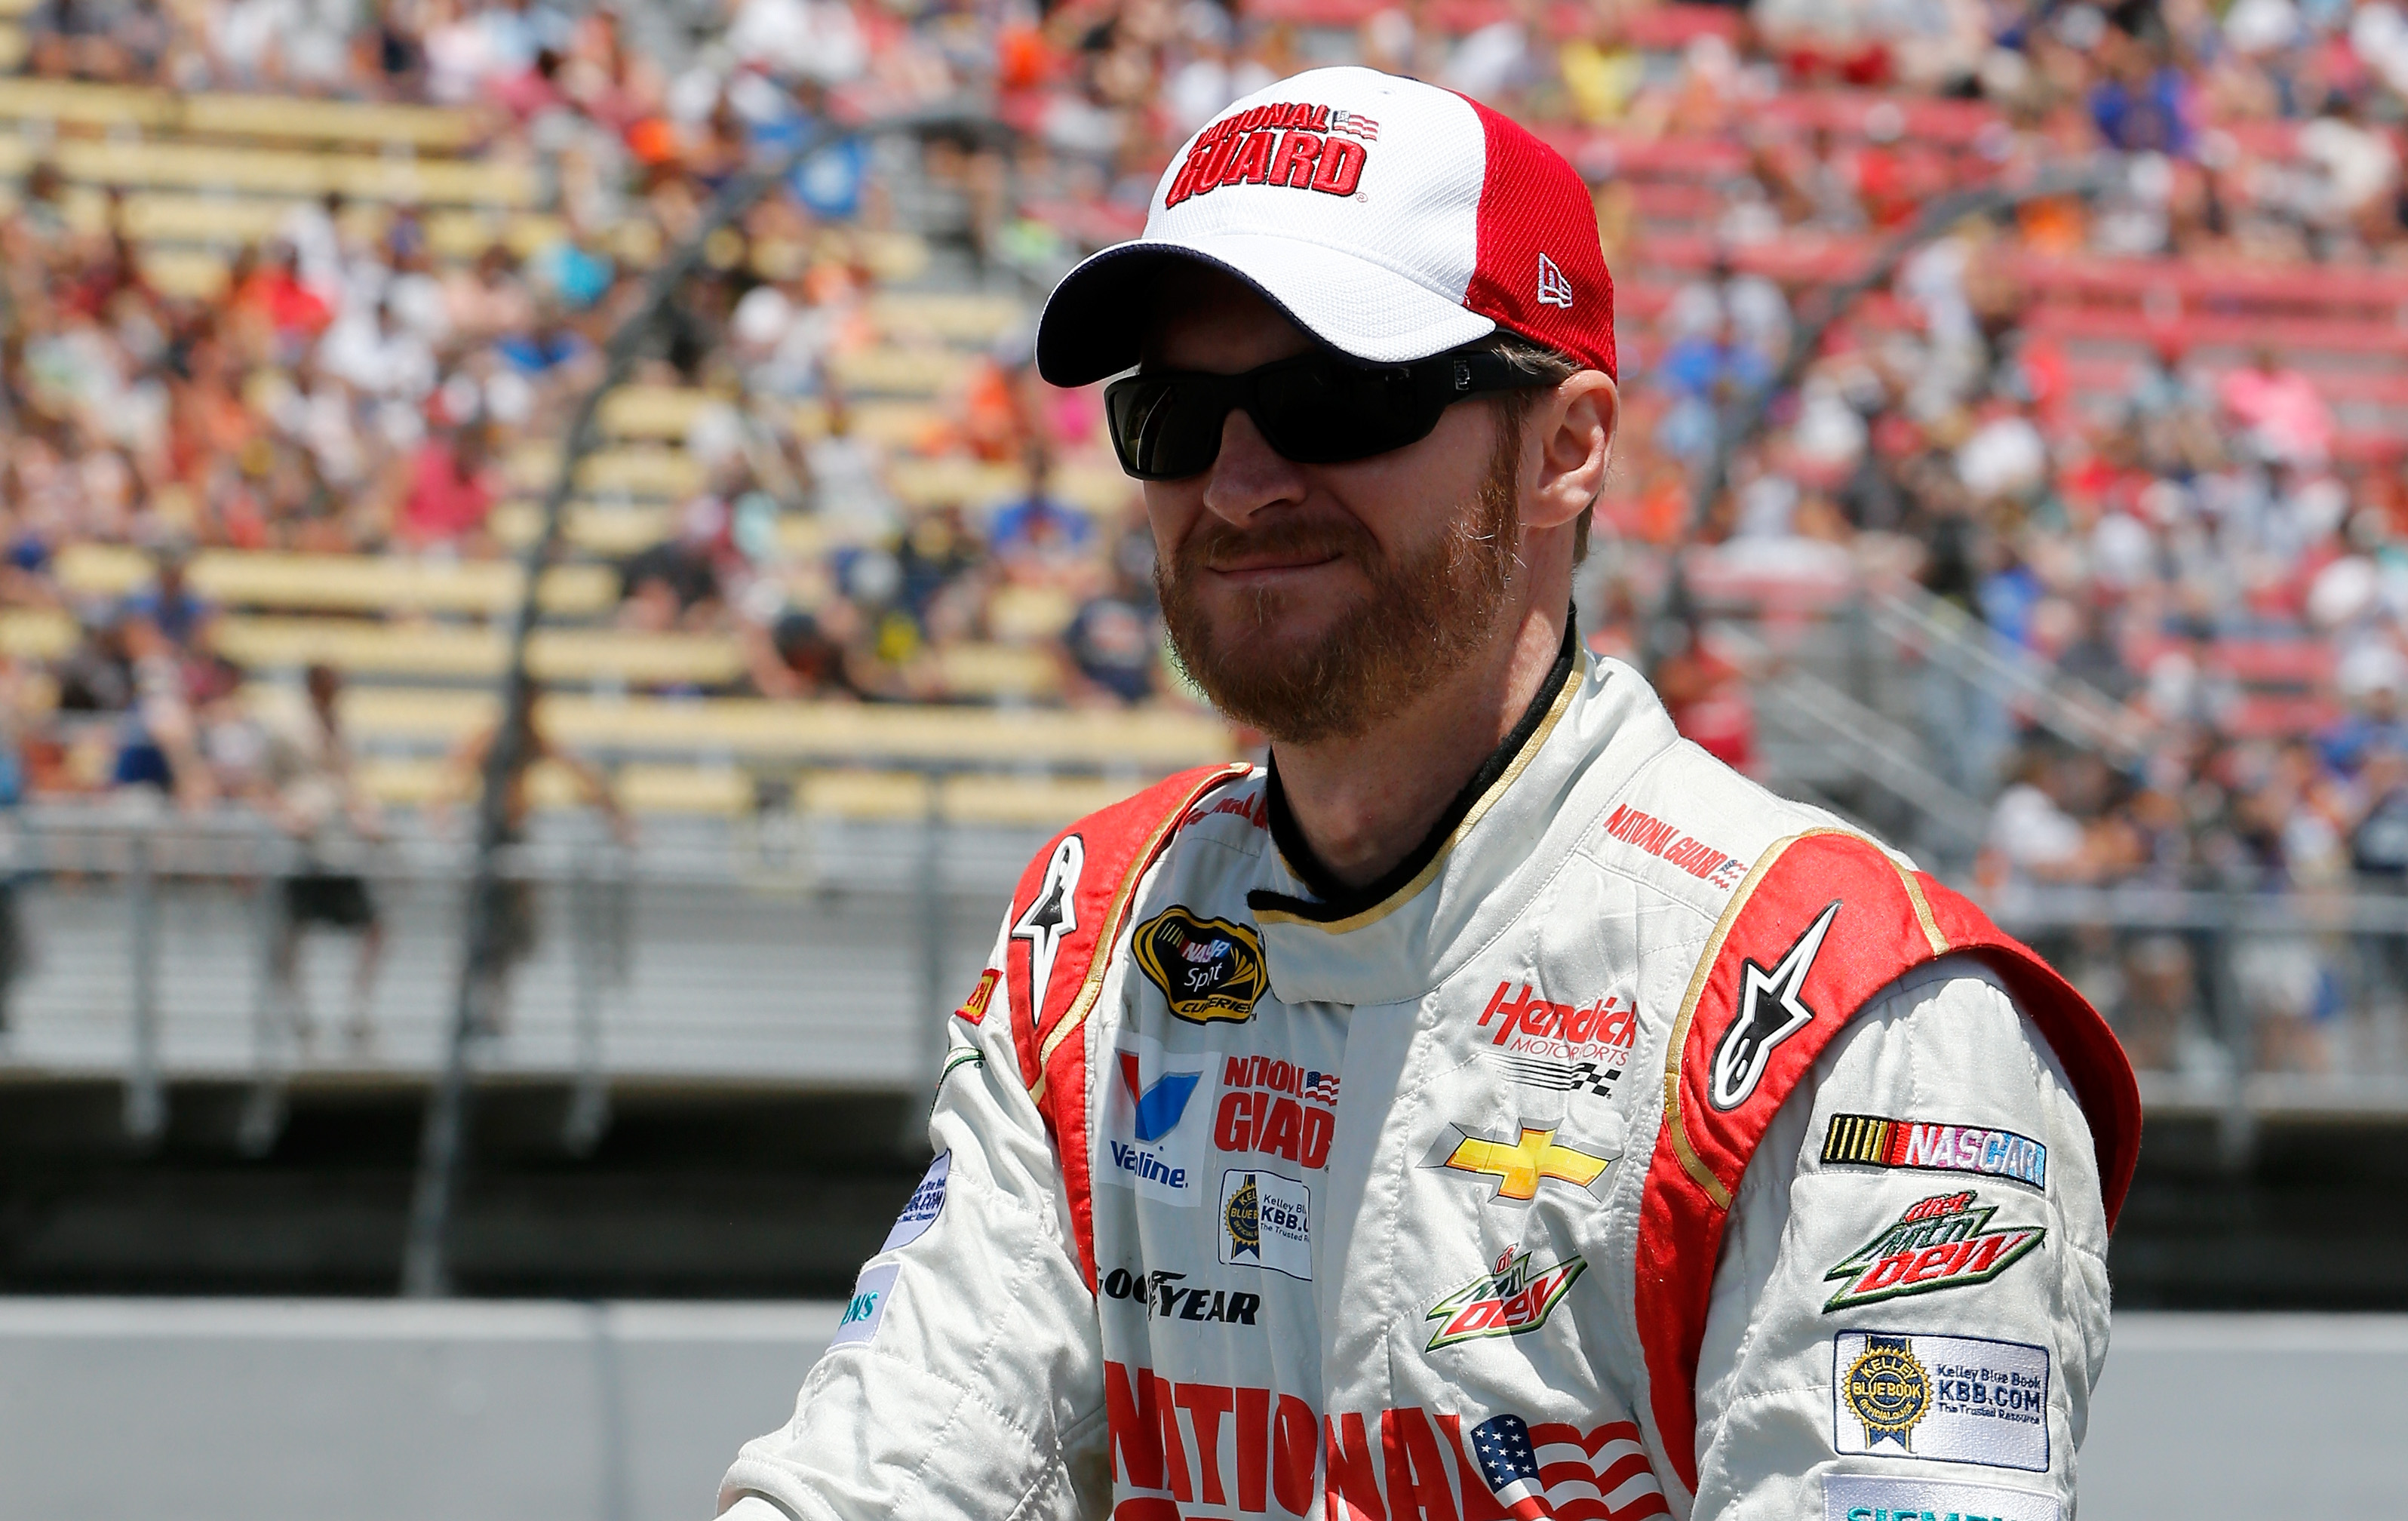 Dale Earnhardt Jr. revealed what he thinks is the greatest accomplishment is NASCAR history.